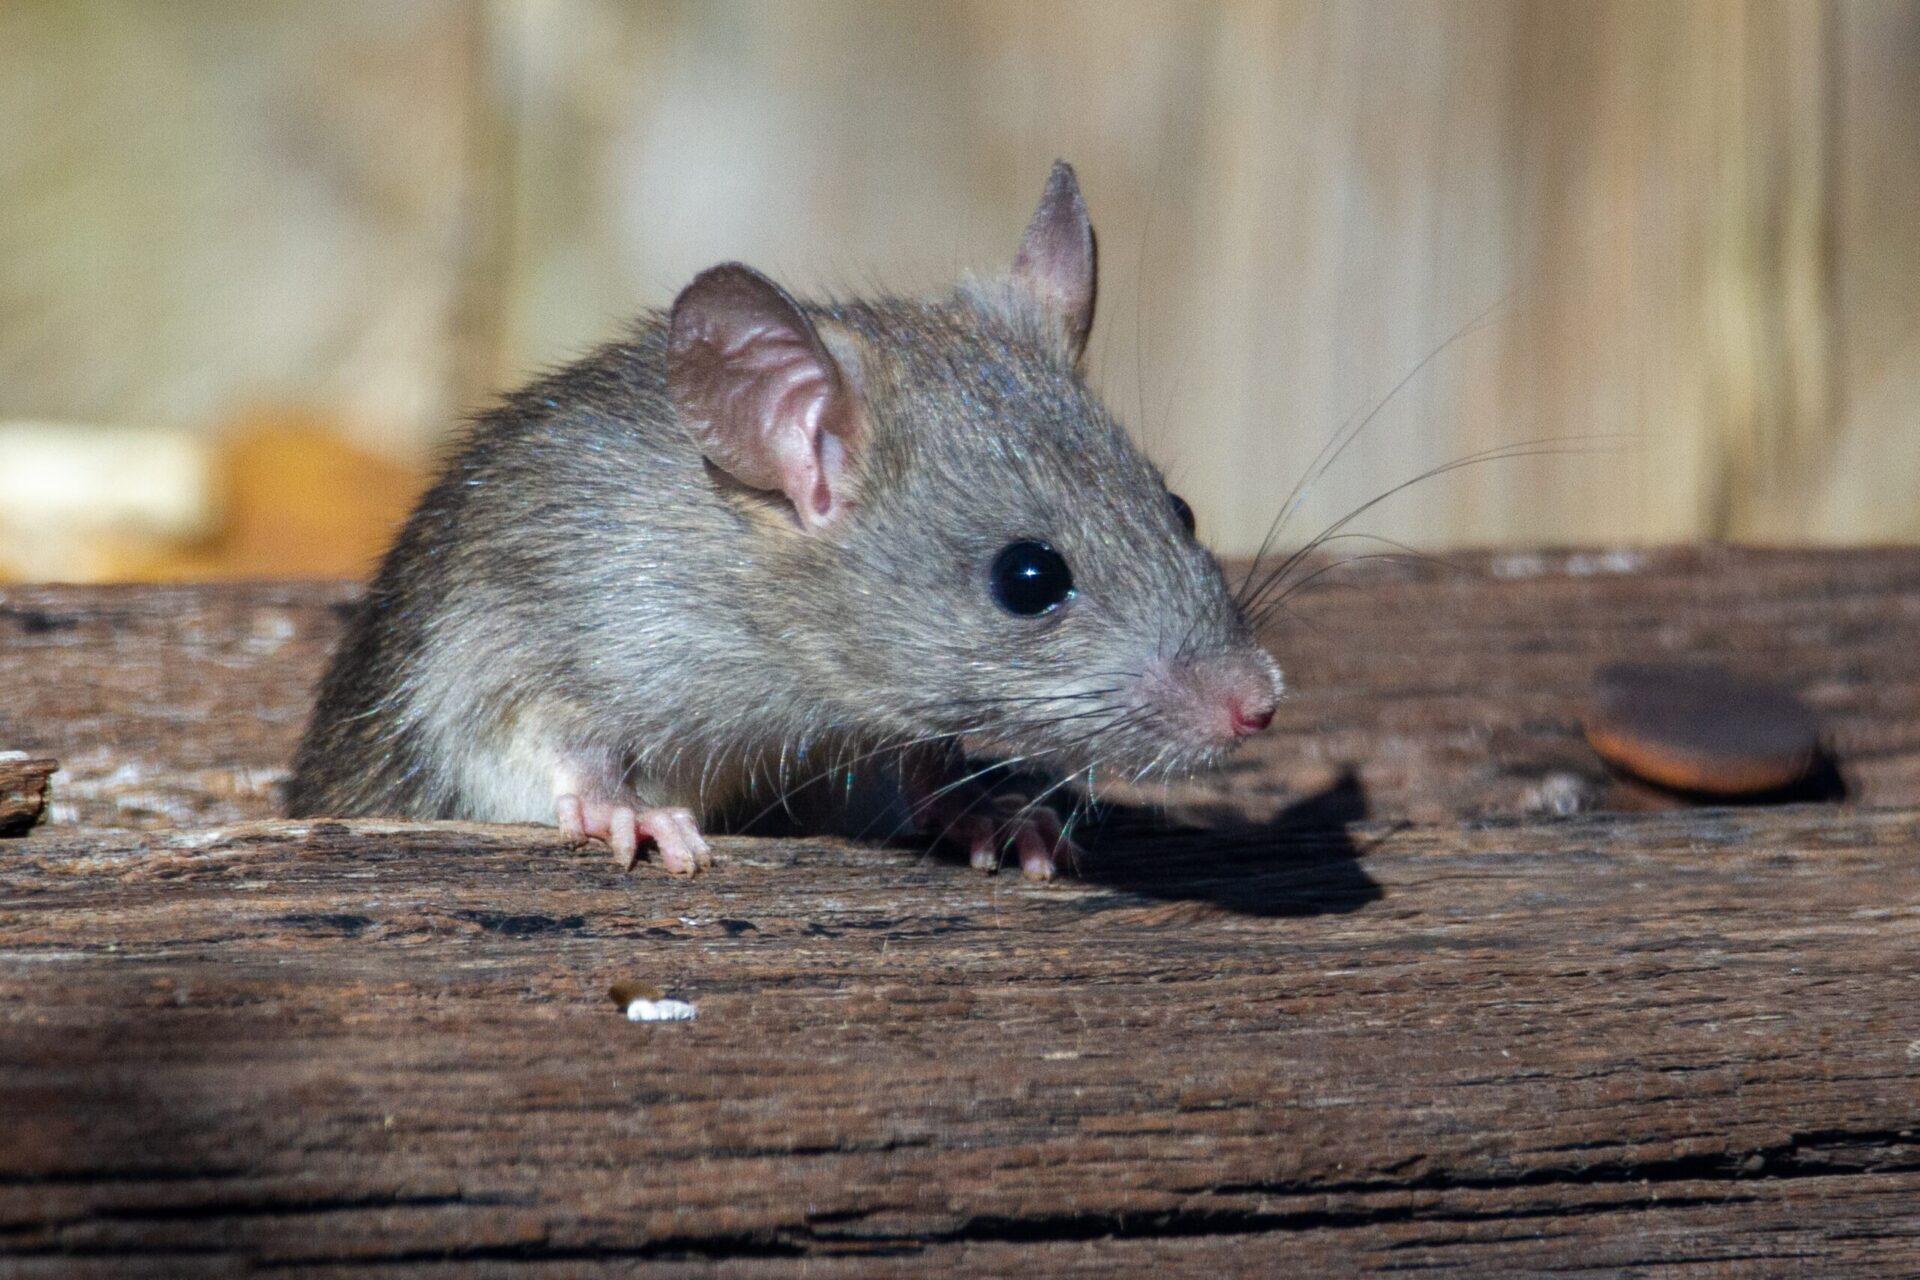 What Is The Best Way To Get Rid Of Rodents?